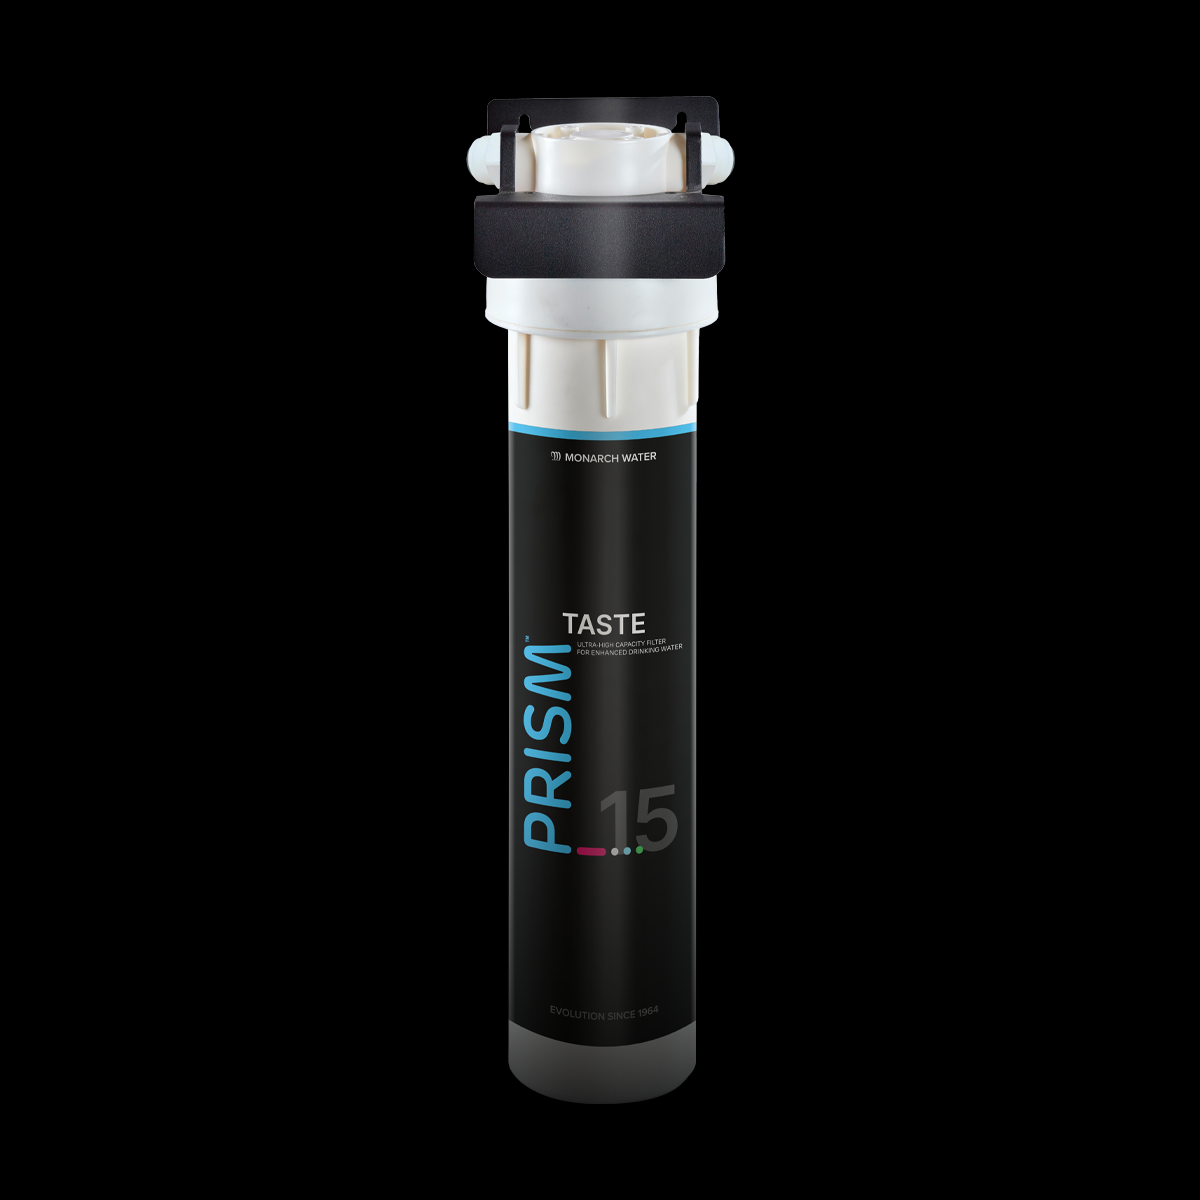 Prism Ultra-High Capacity Filter TASTE 15 by Monarch Water.